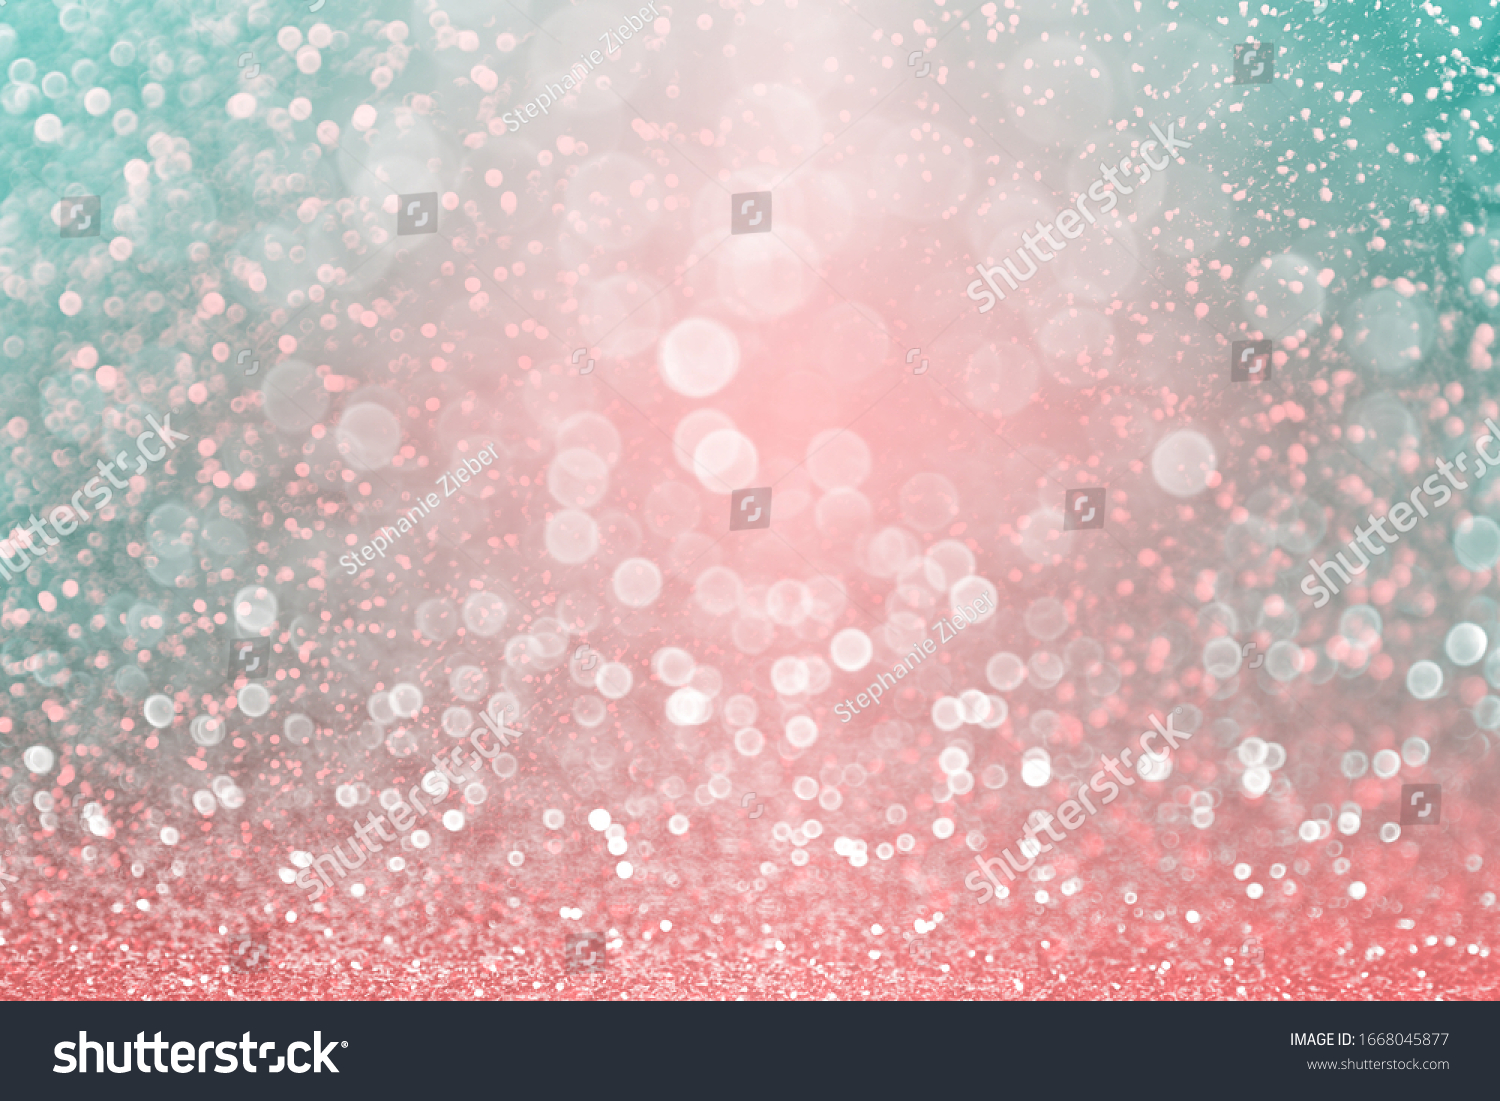 Fancy teal green glitter, coral pink and peach sparkle confetti background for turquoise happy birthday party invite, spring Easter banner, aqua mint wedding, fun xmas pattern or girly perfume texture #1668045877